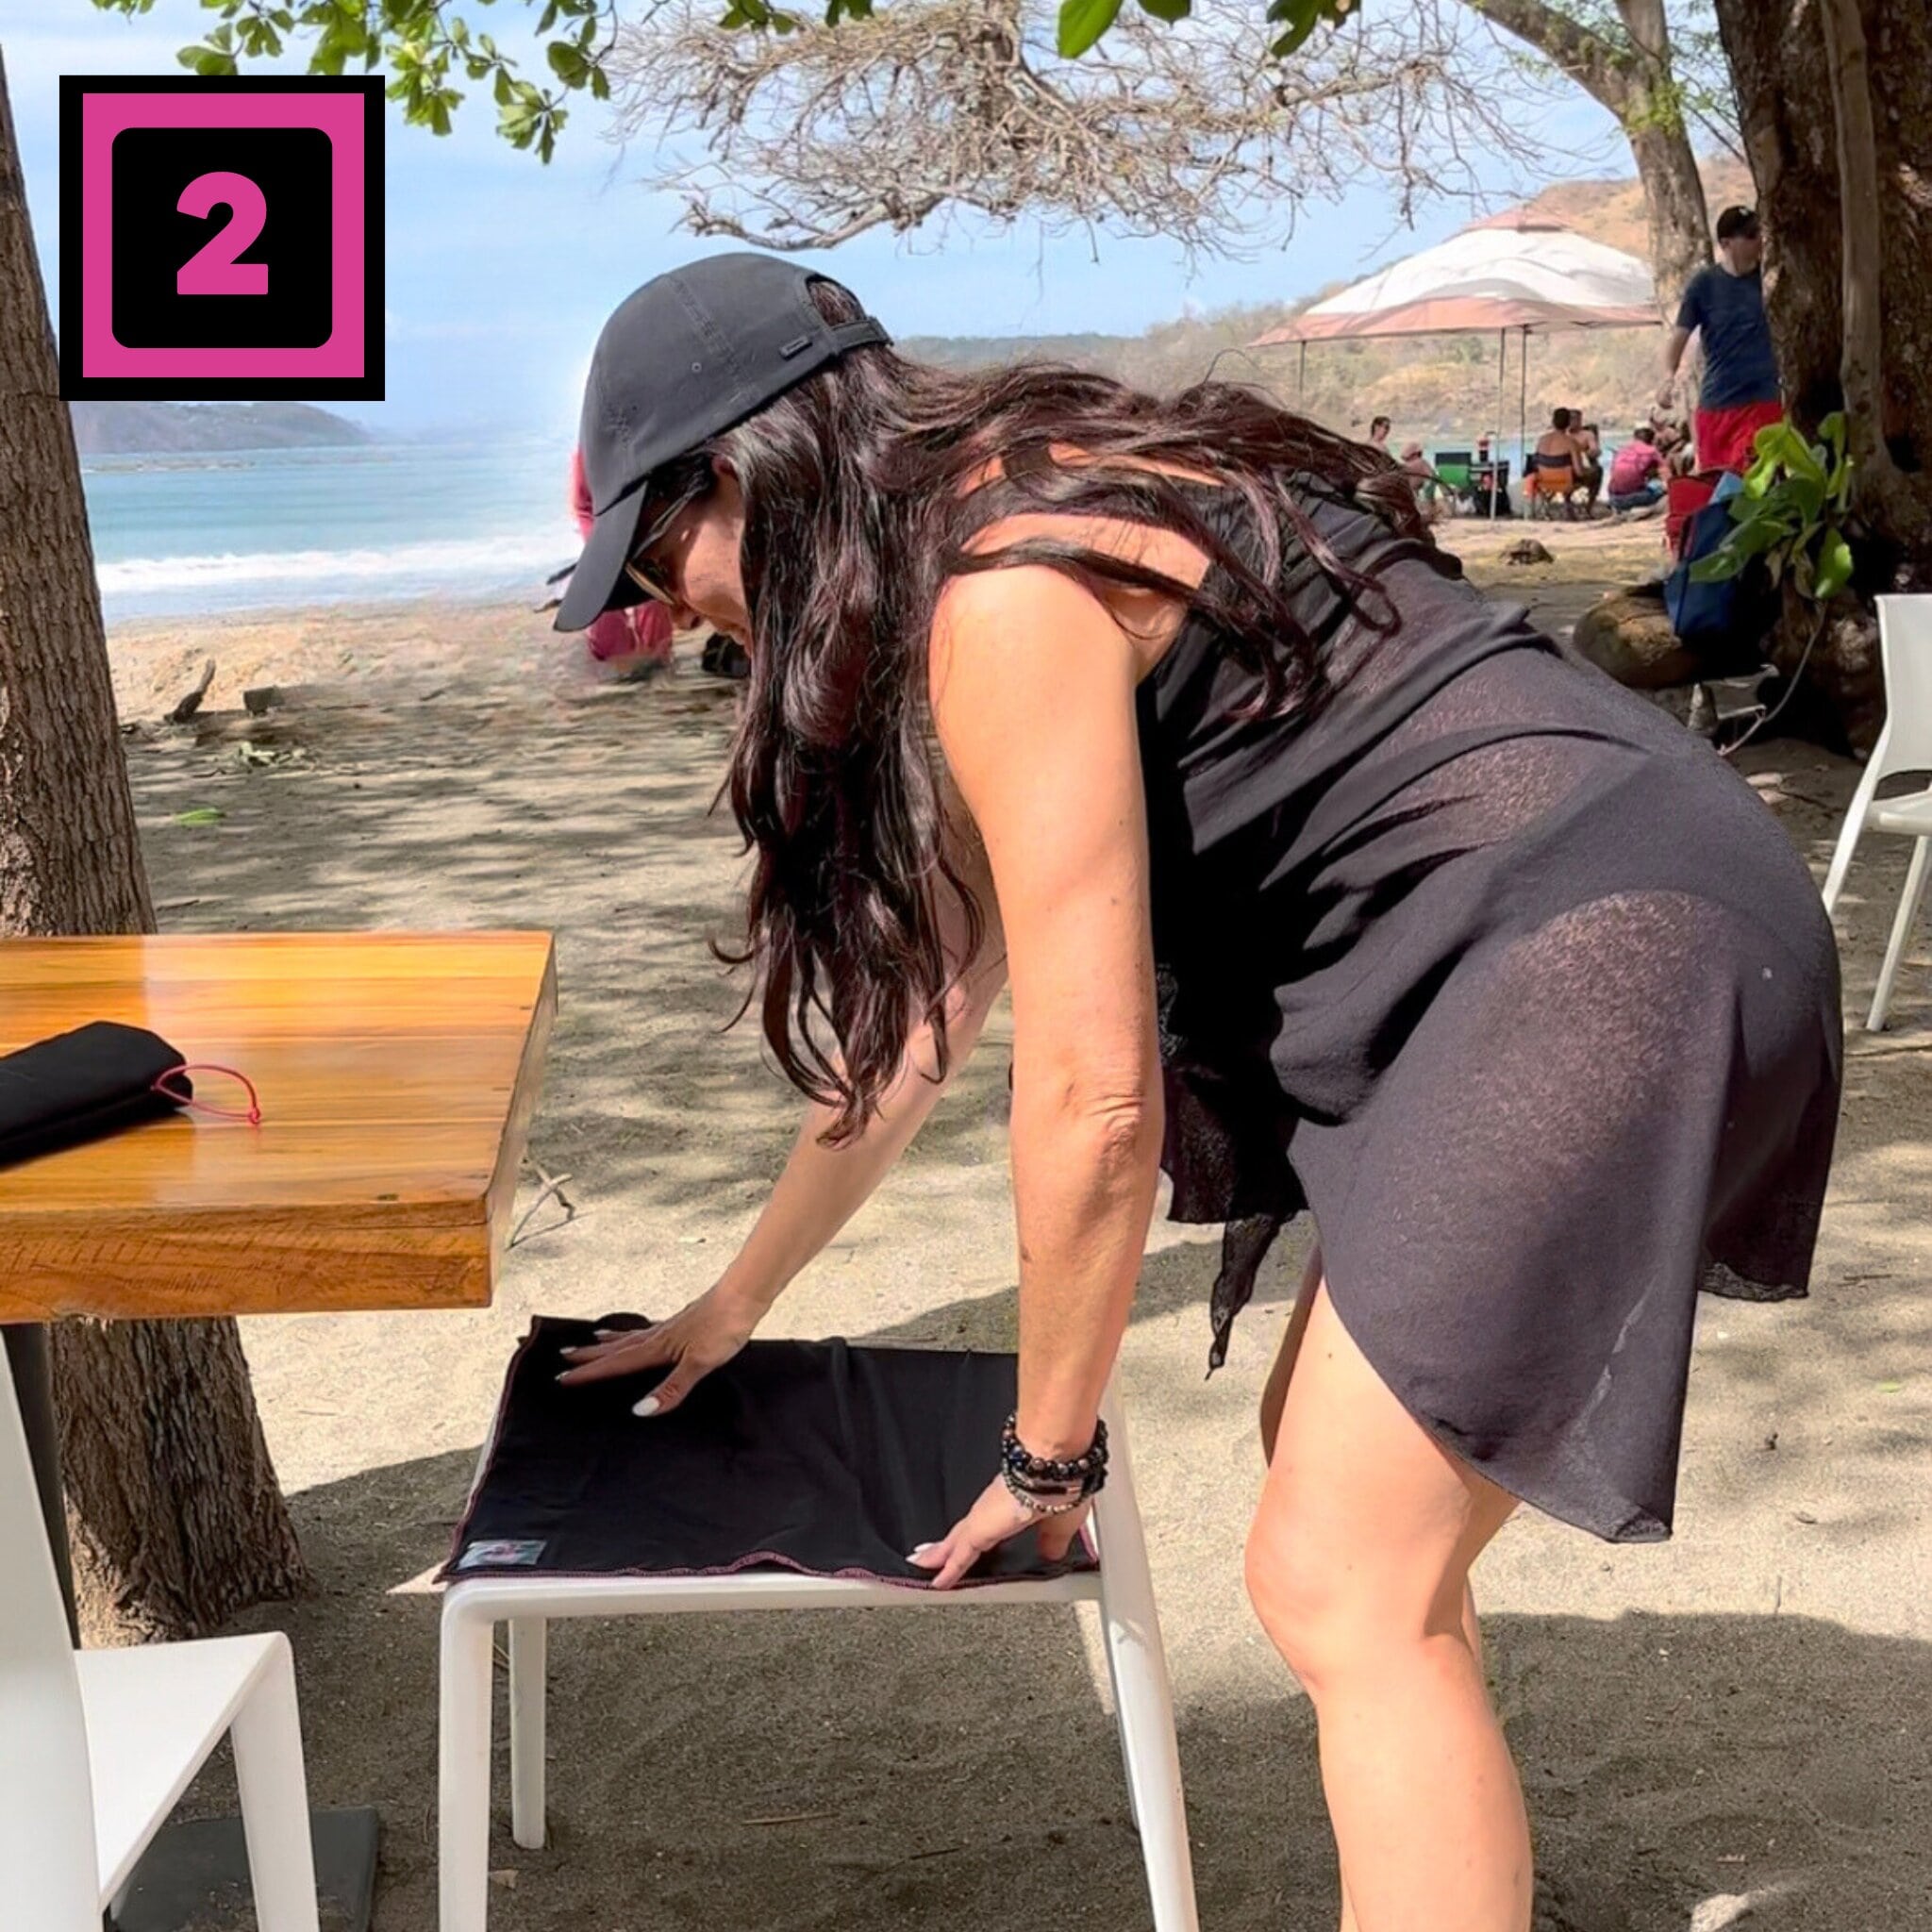 Seat Square | Woman at restaurant on beach placing Seat Square on table chair